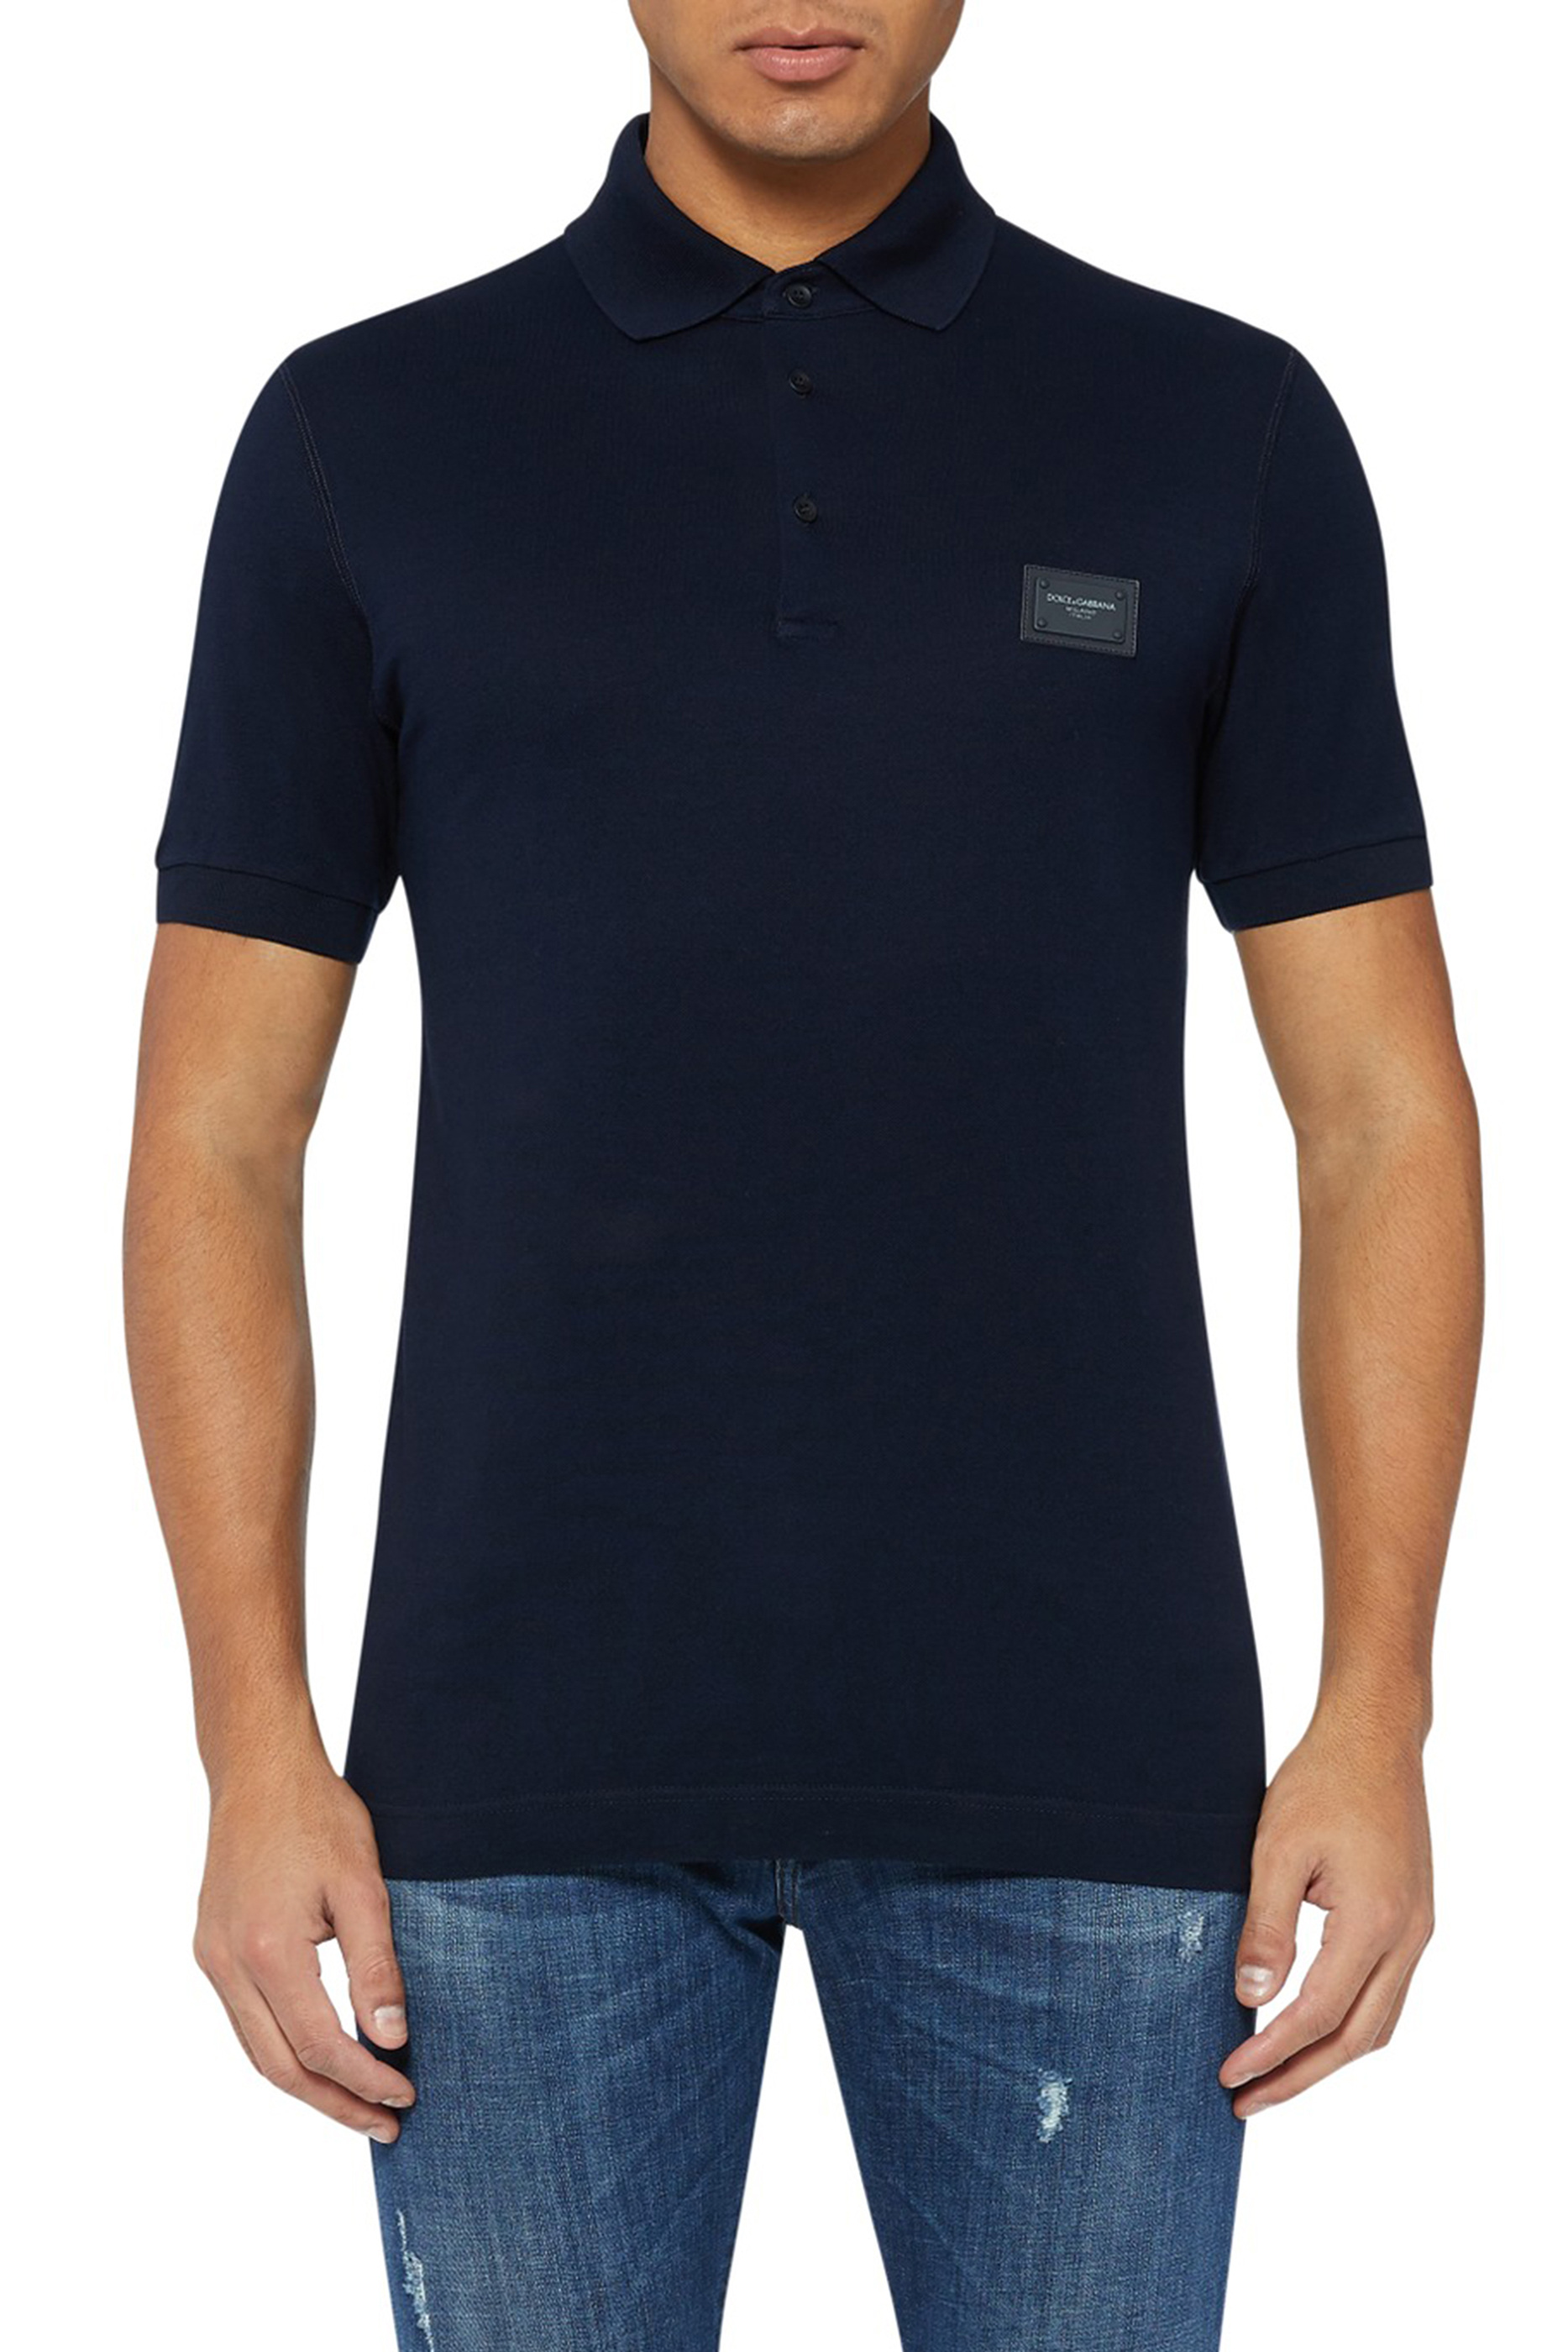 Buy Dolce & Gabbana Jersey Polo Shirt - Mens for AED 1400.00 Polos ...